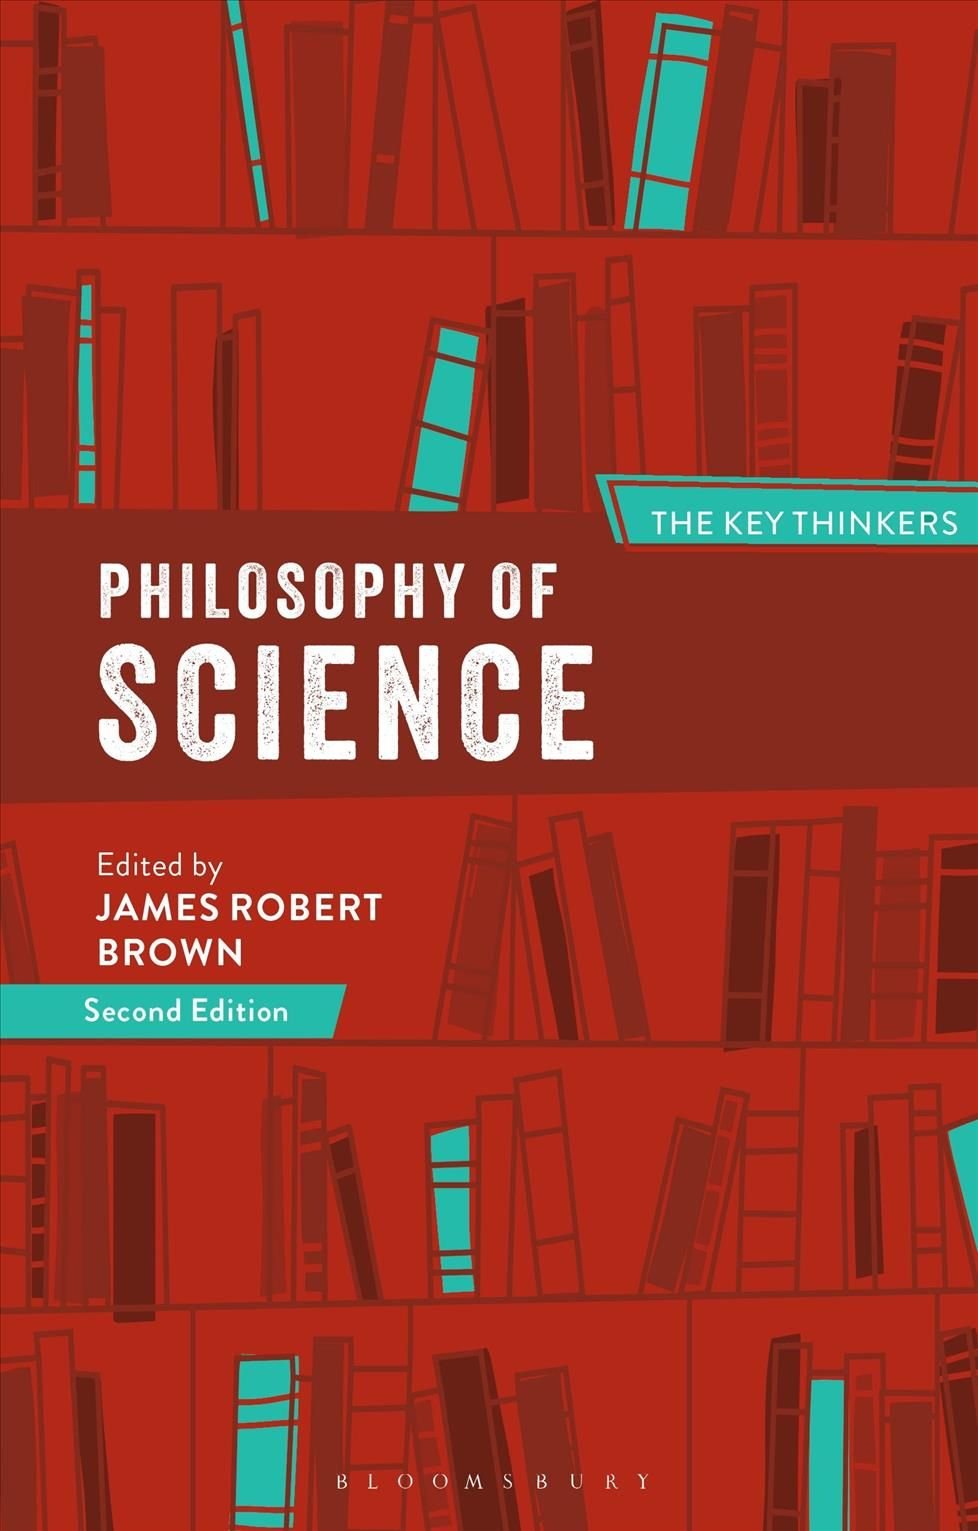 Brown　Robert　Free　With　James　by　Thinkers　Science:　Key　The　of　Philosophy　Buy　Delivery